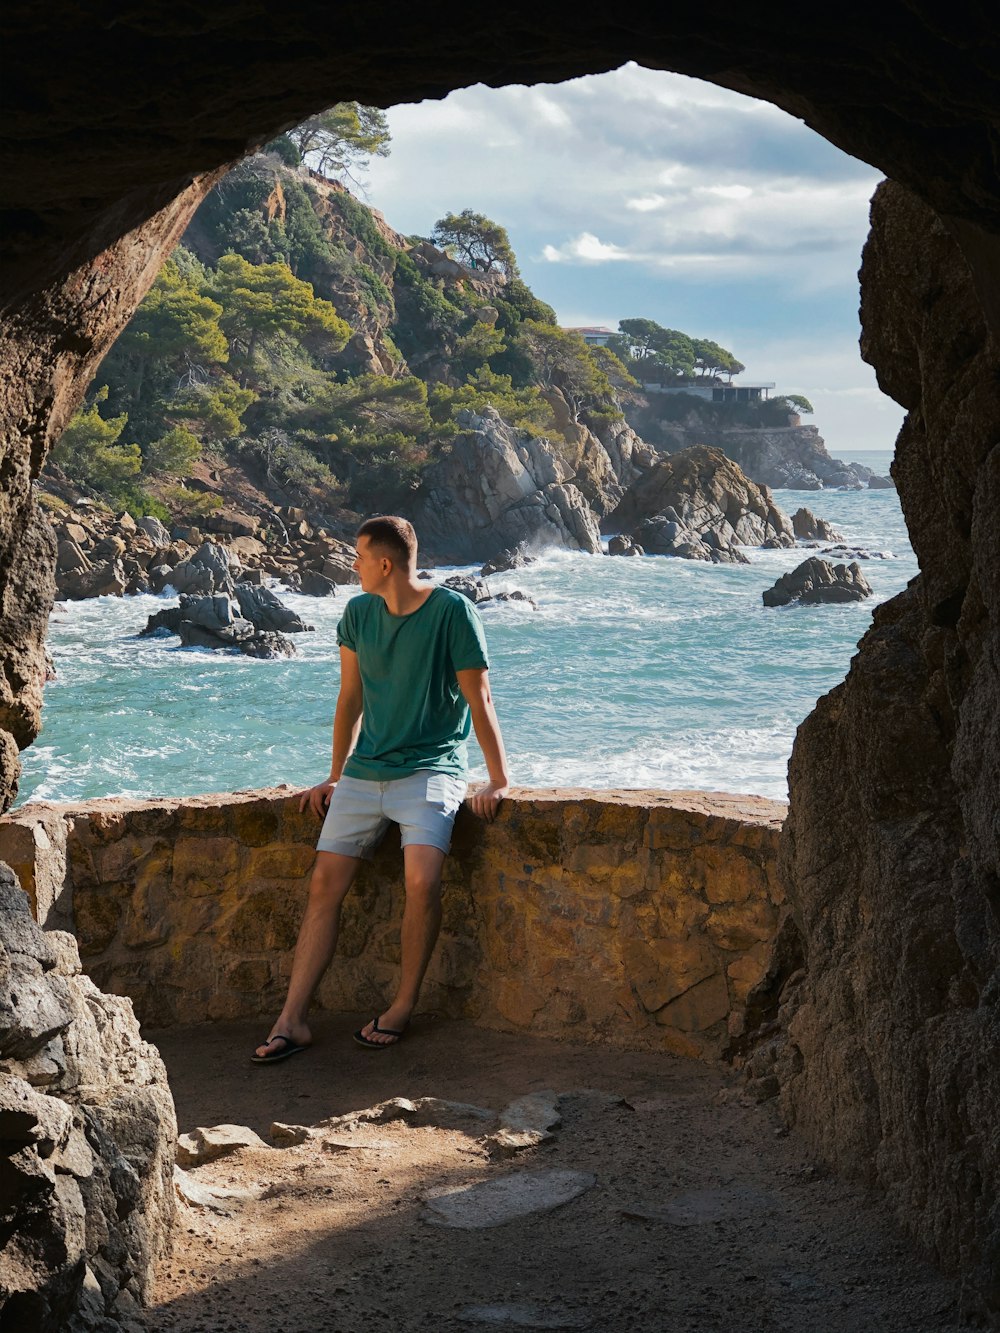 man in teal t-shirt standing on rock formation near sea during daytime